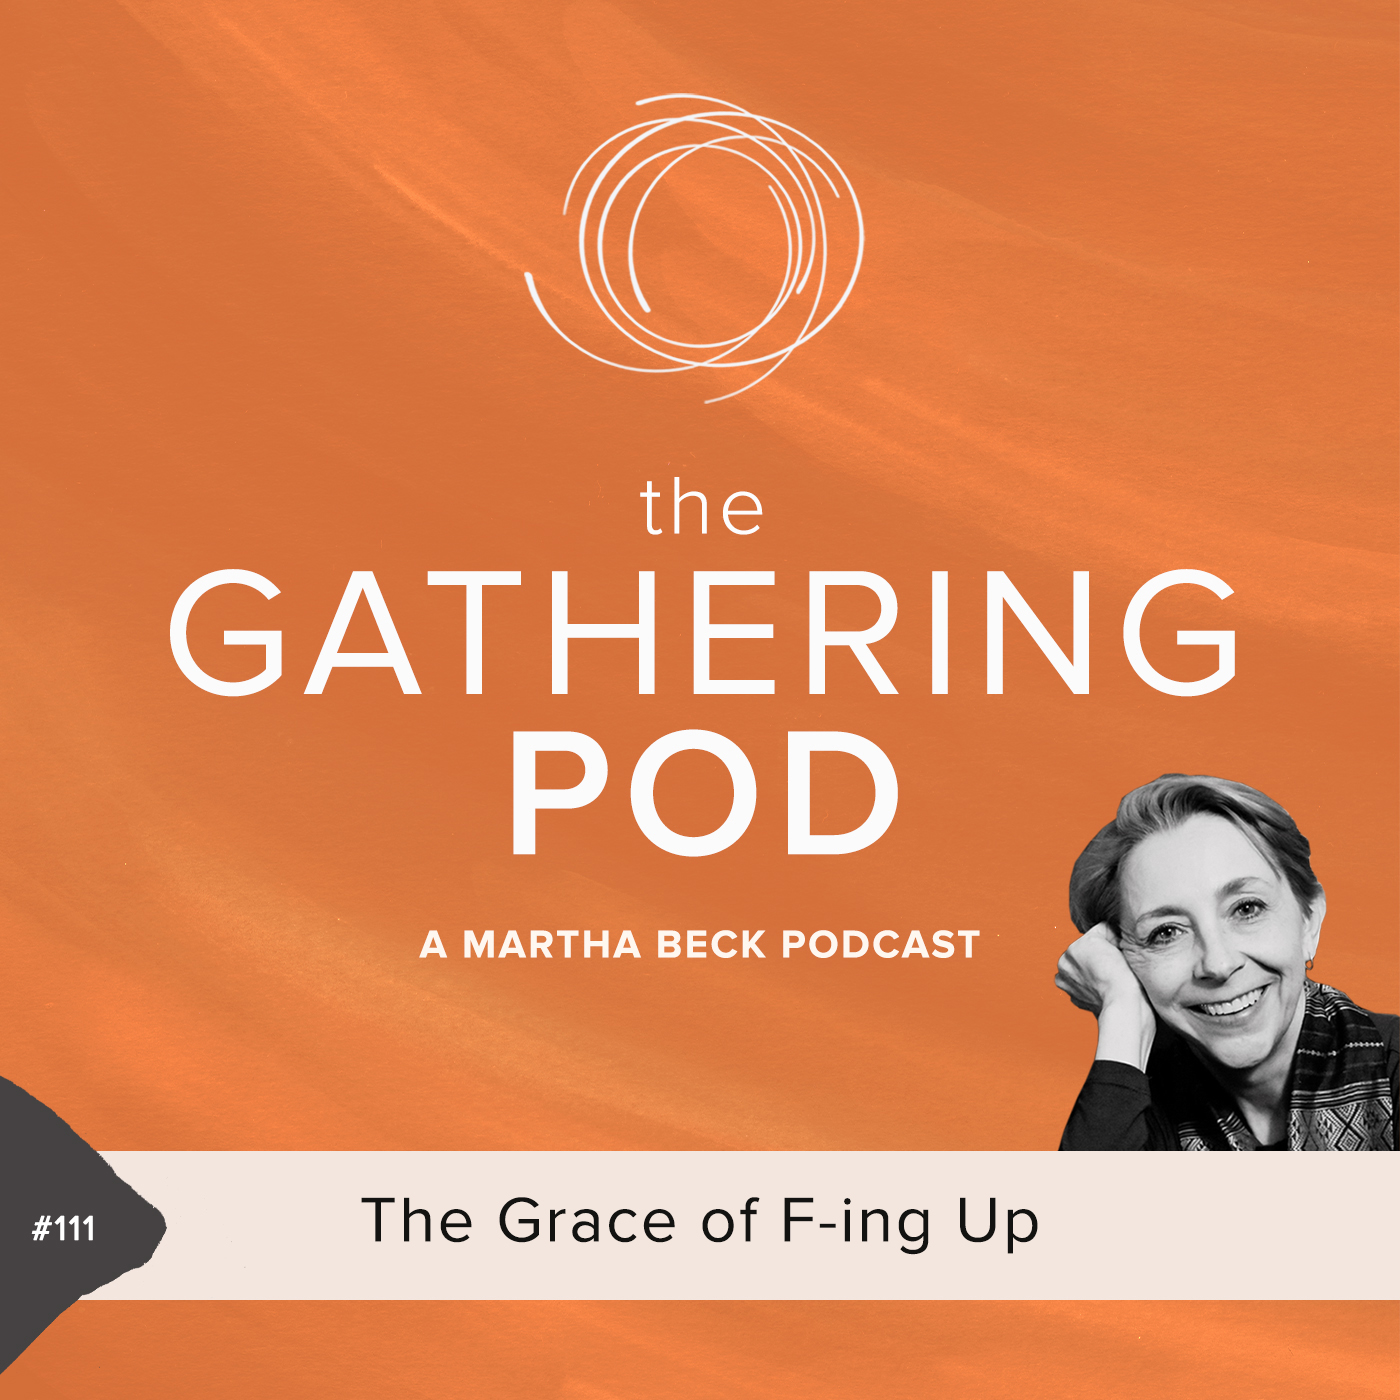 Image for The Gathering Pod A Martha Beck Podcast Episode #111 The Grace of F-ing Up